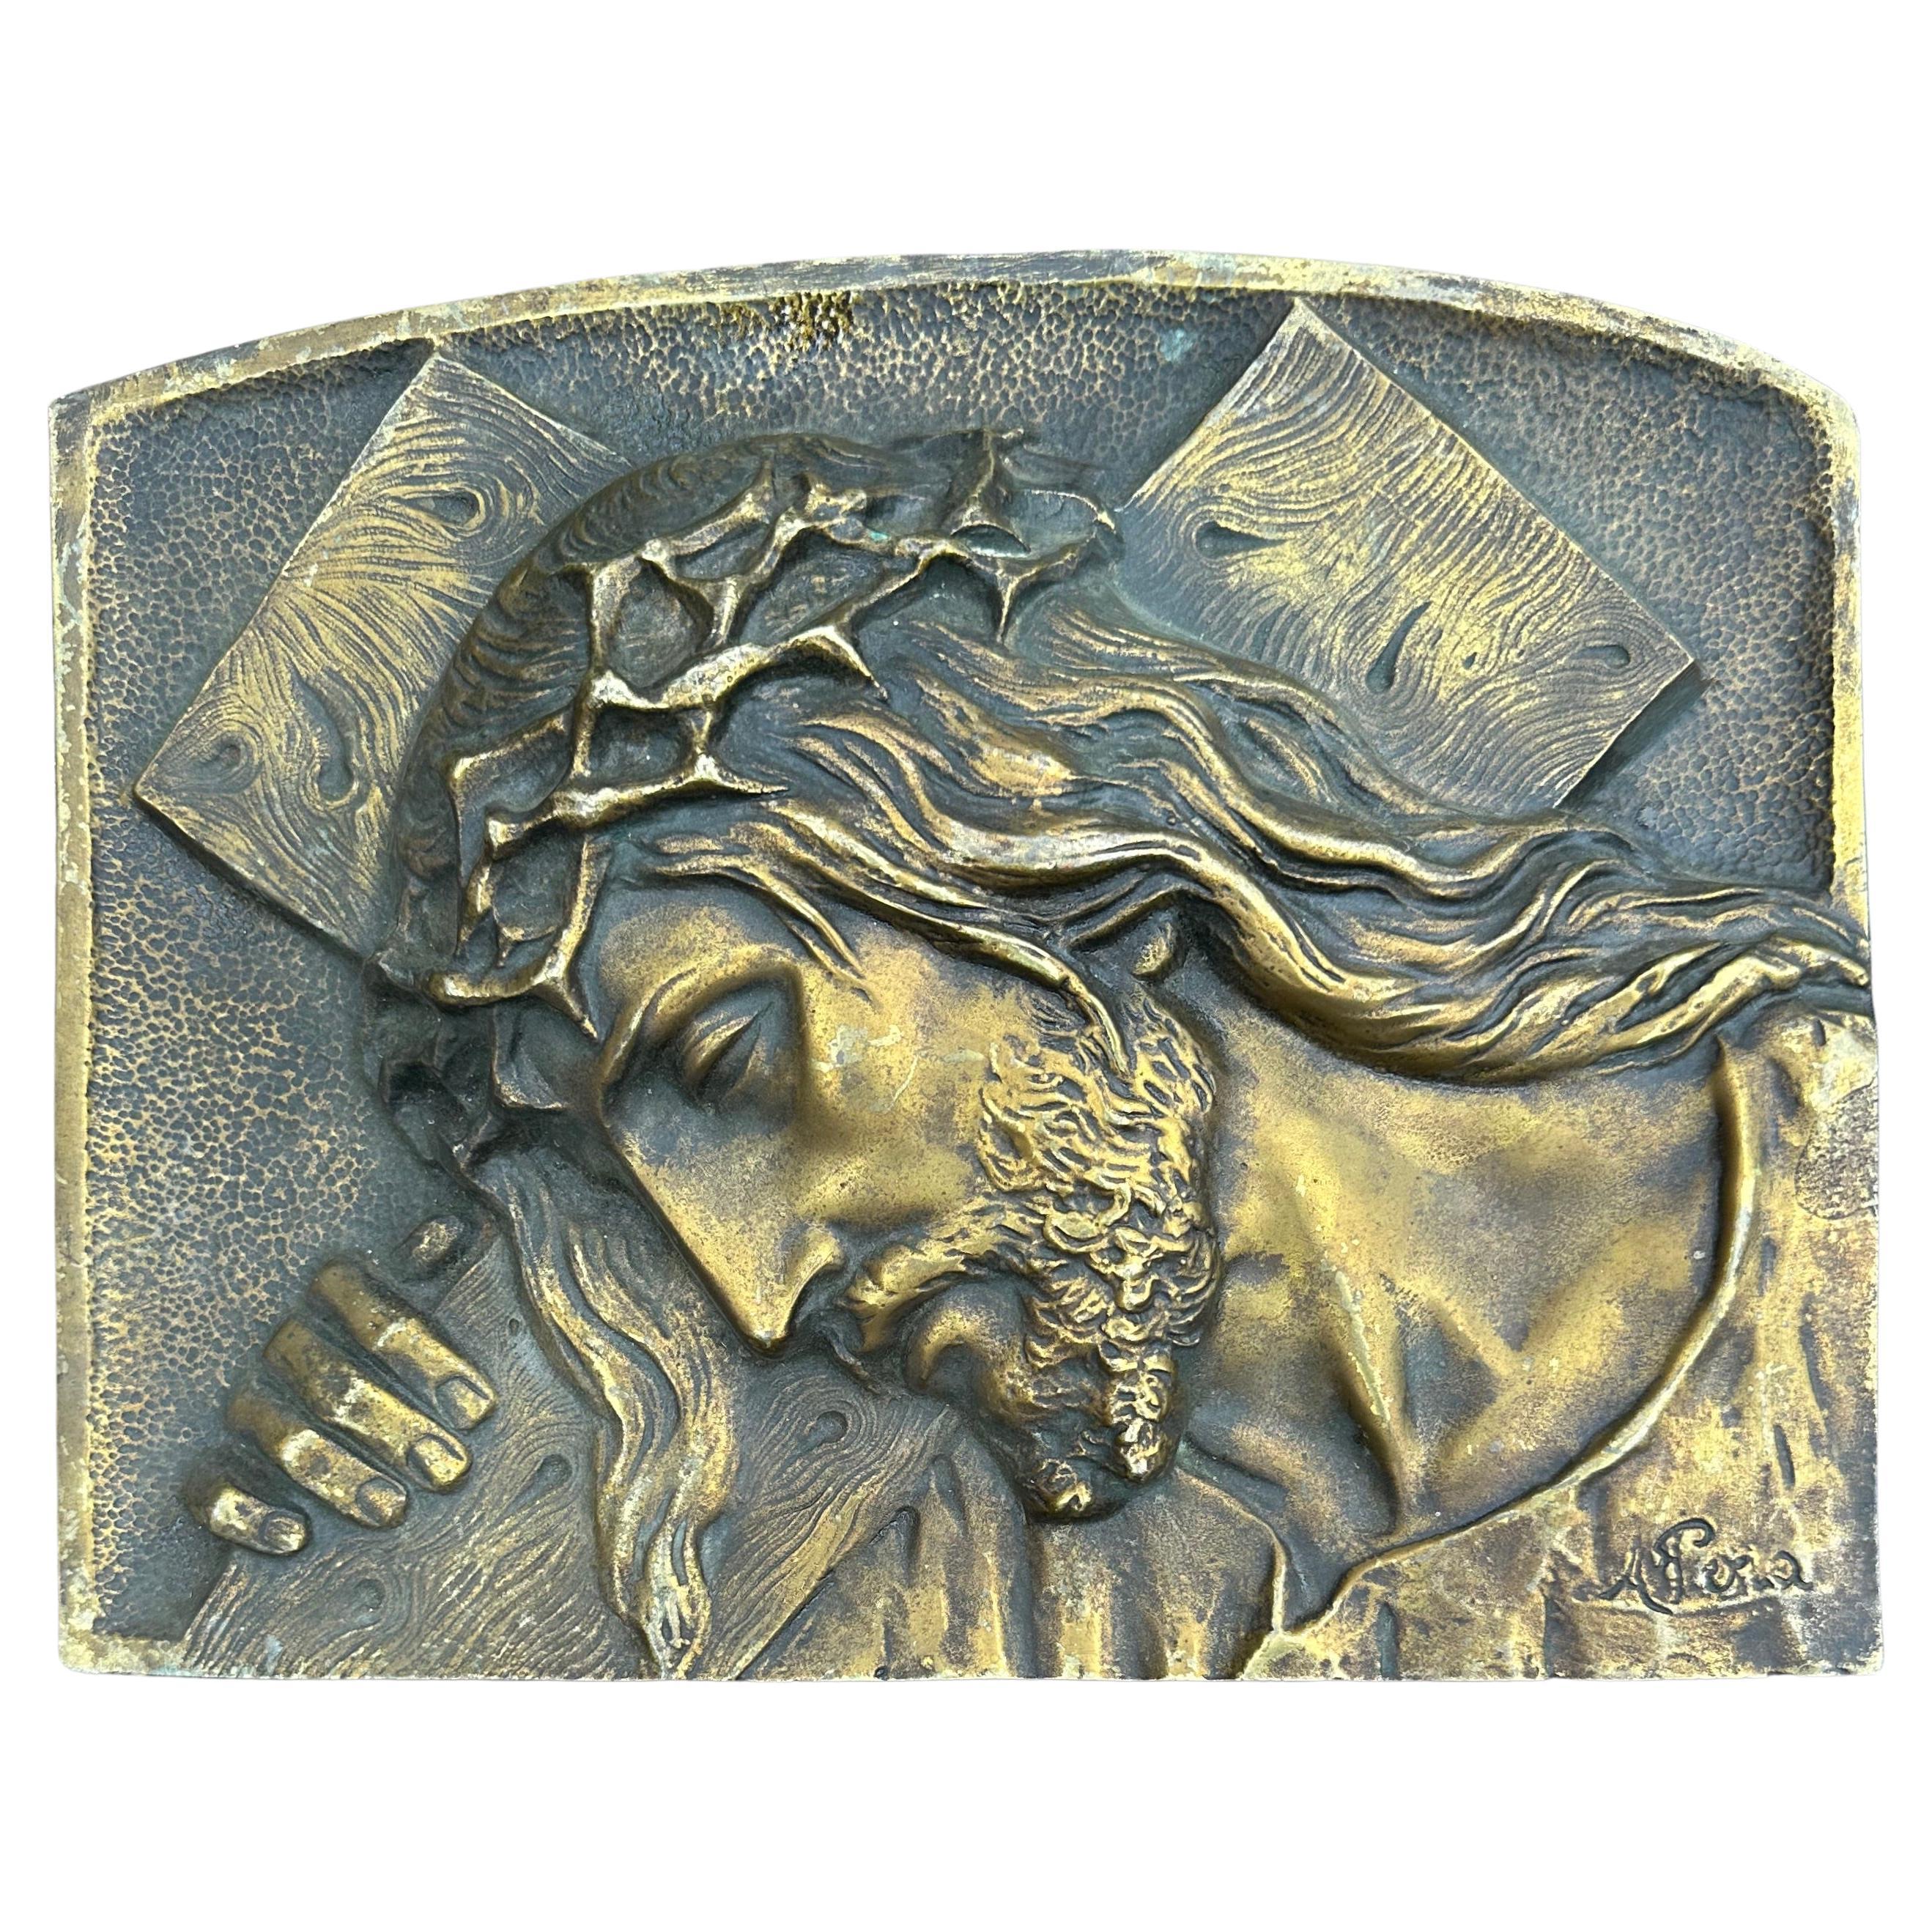 Museum Quality Bronze of Christ Wall Plaque Sculpture "Jesus Carrying the Cross" For Sale